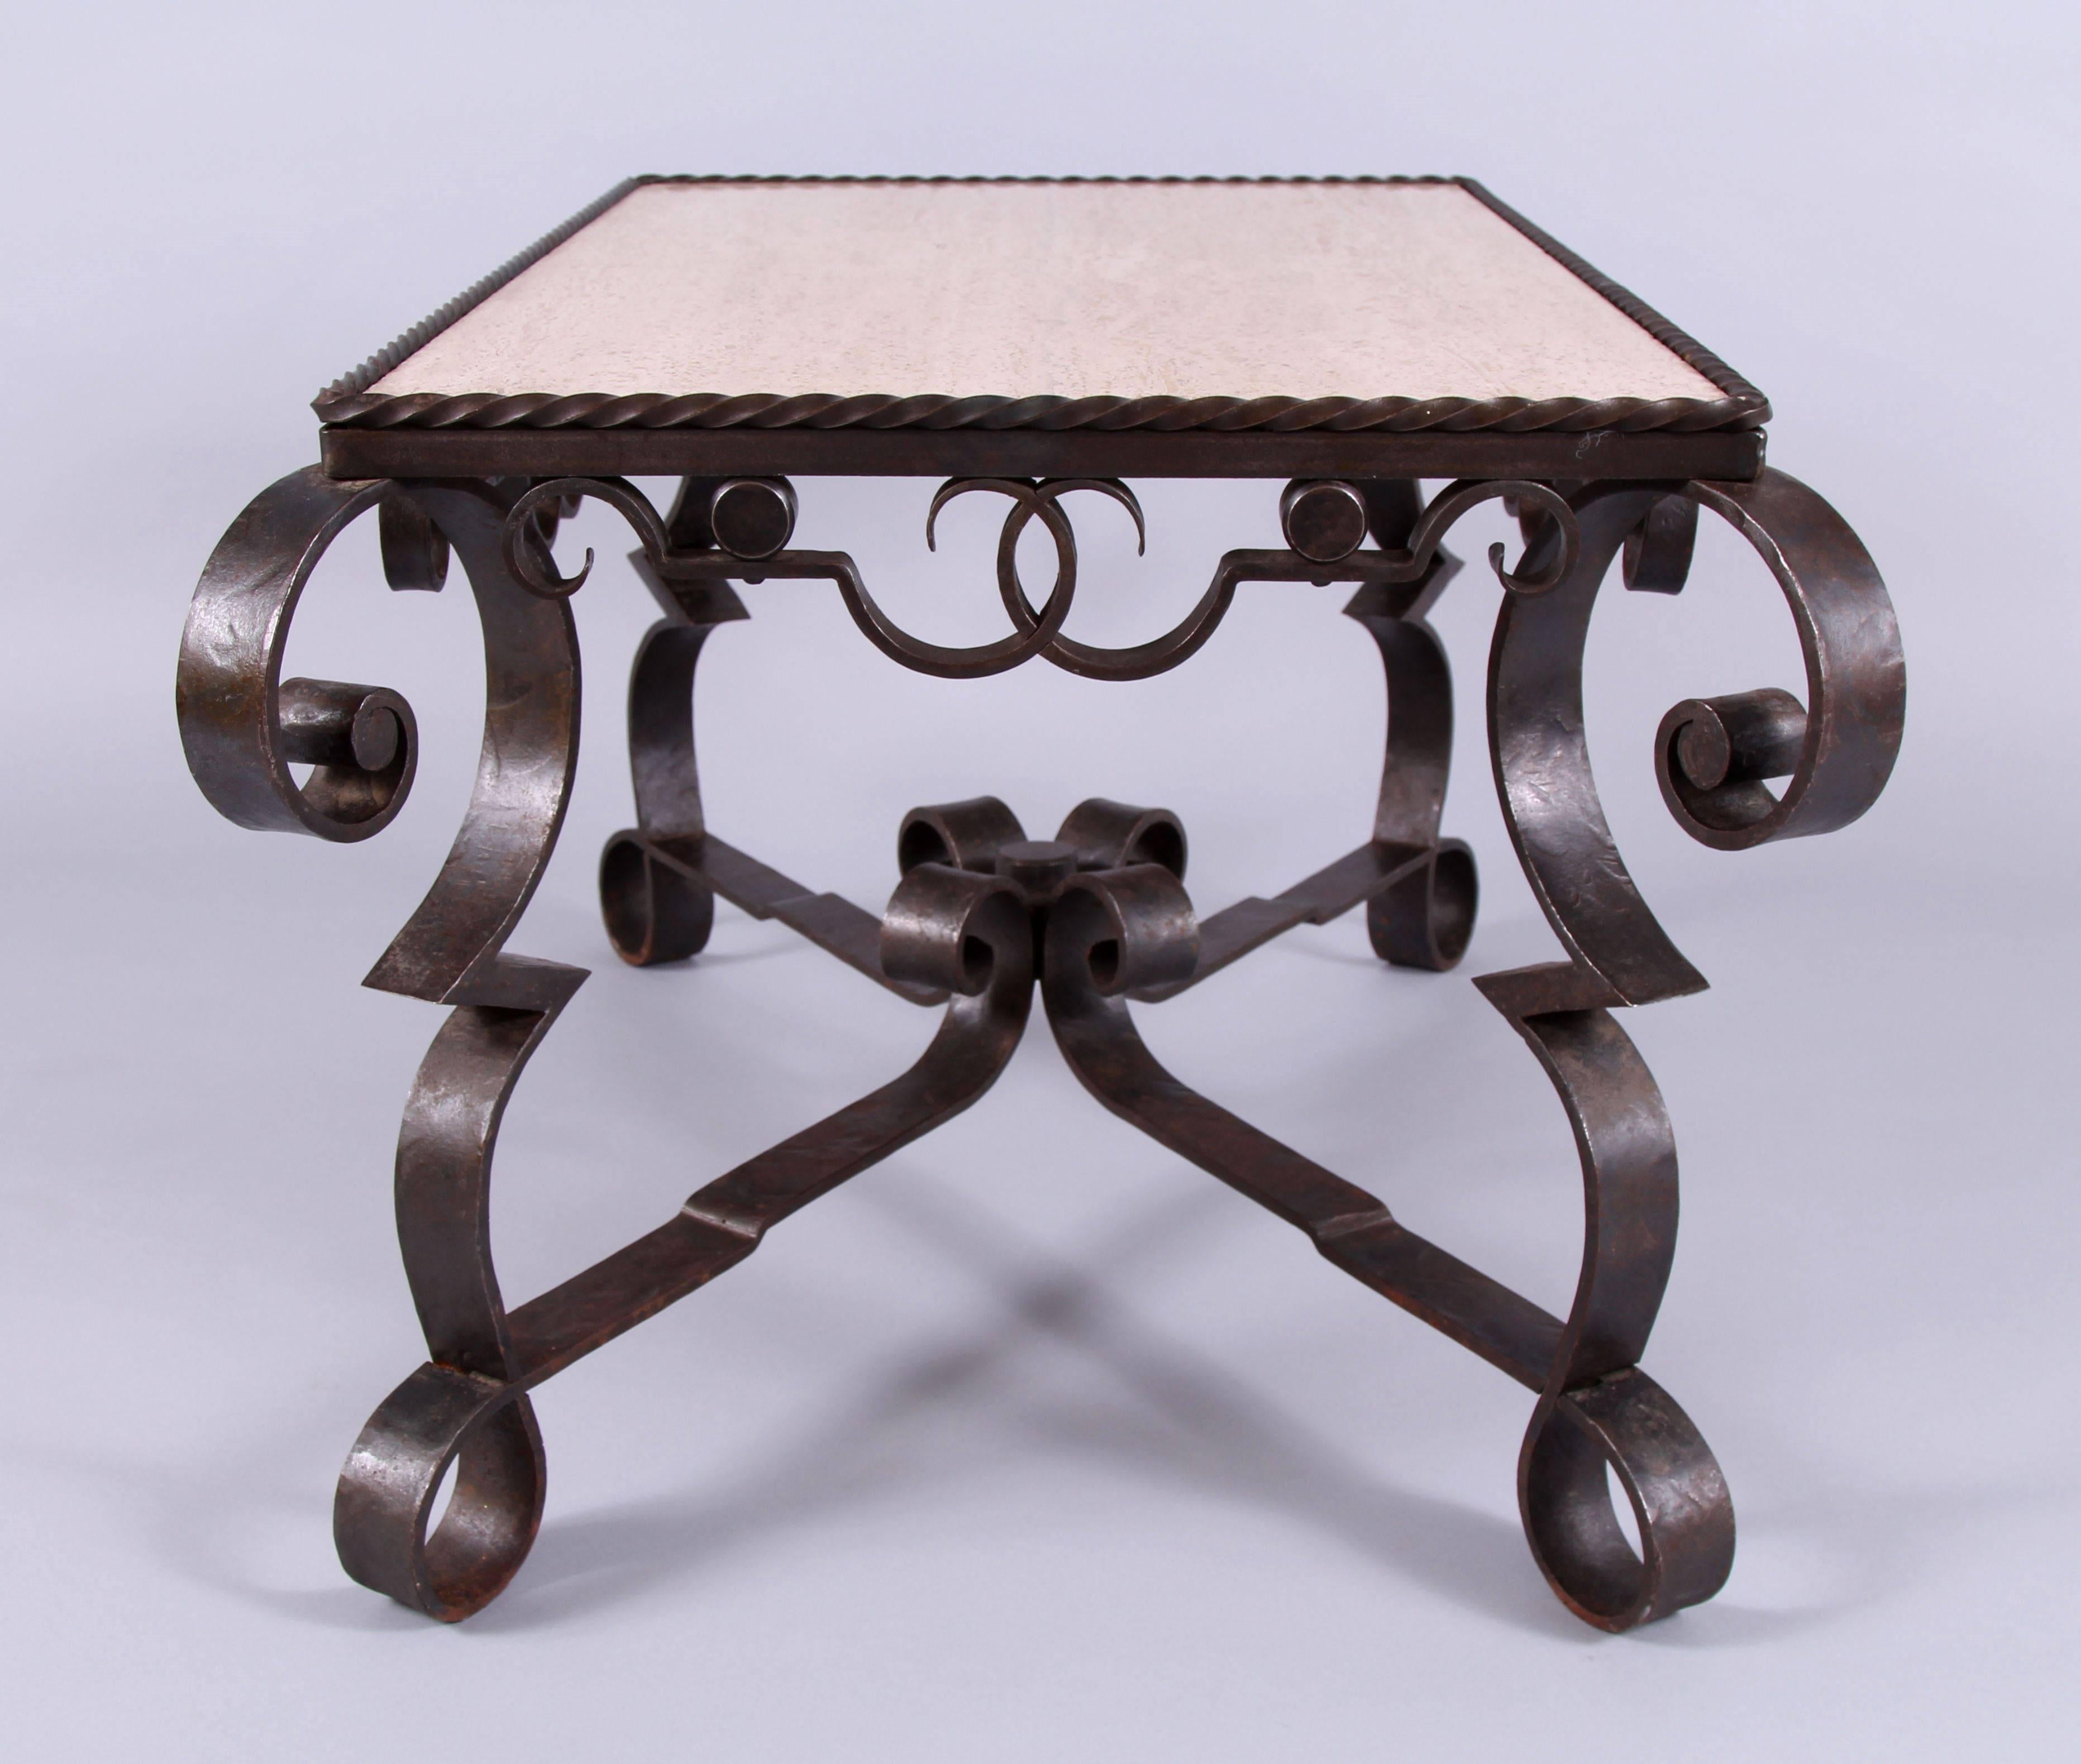 Early 20th Century Marble Wrought Iron Coffee Table, Art Deco In Excellent Condition In London, by appointment only